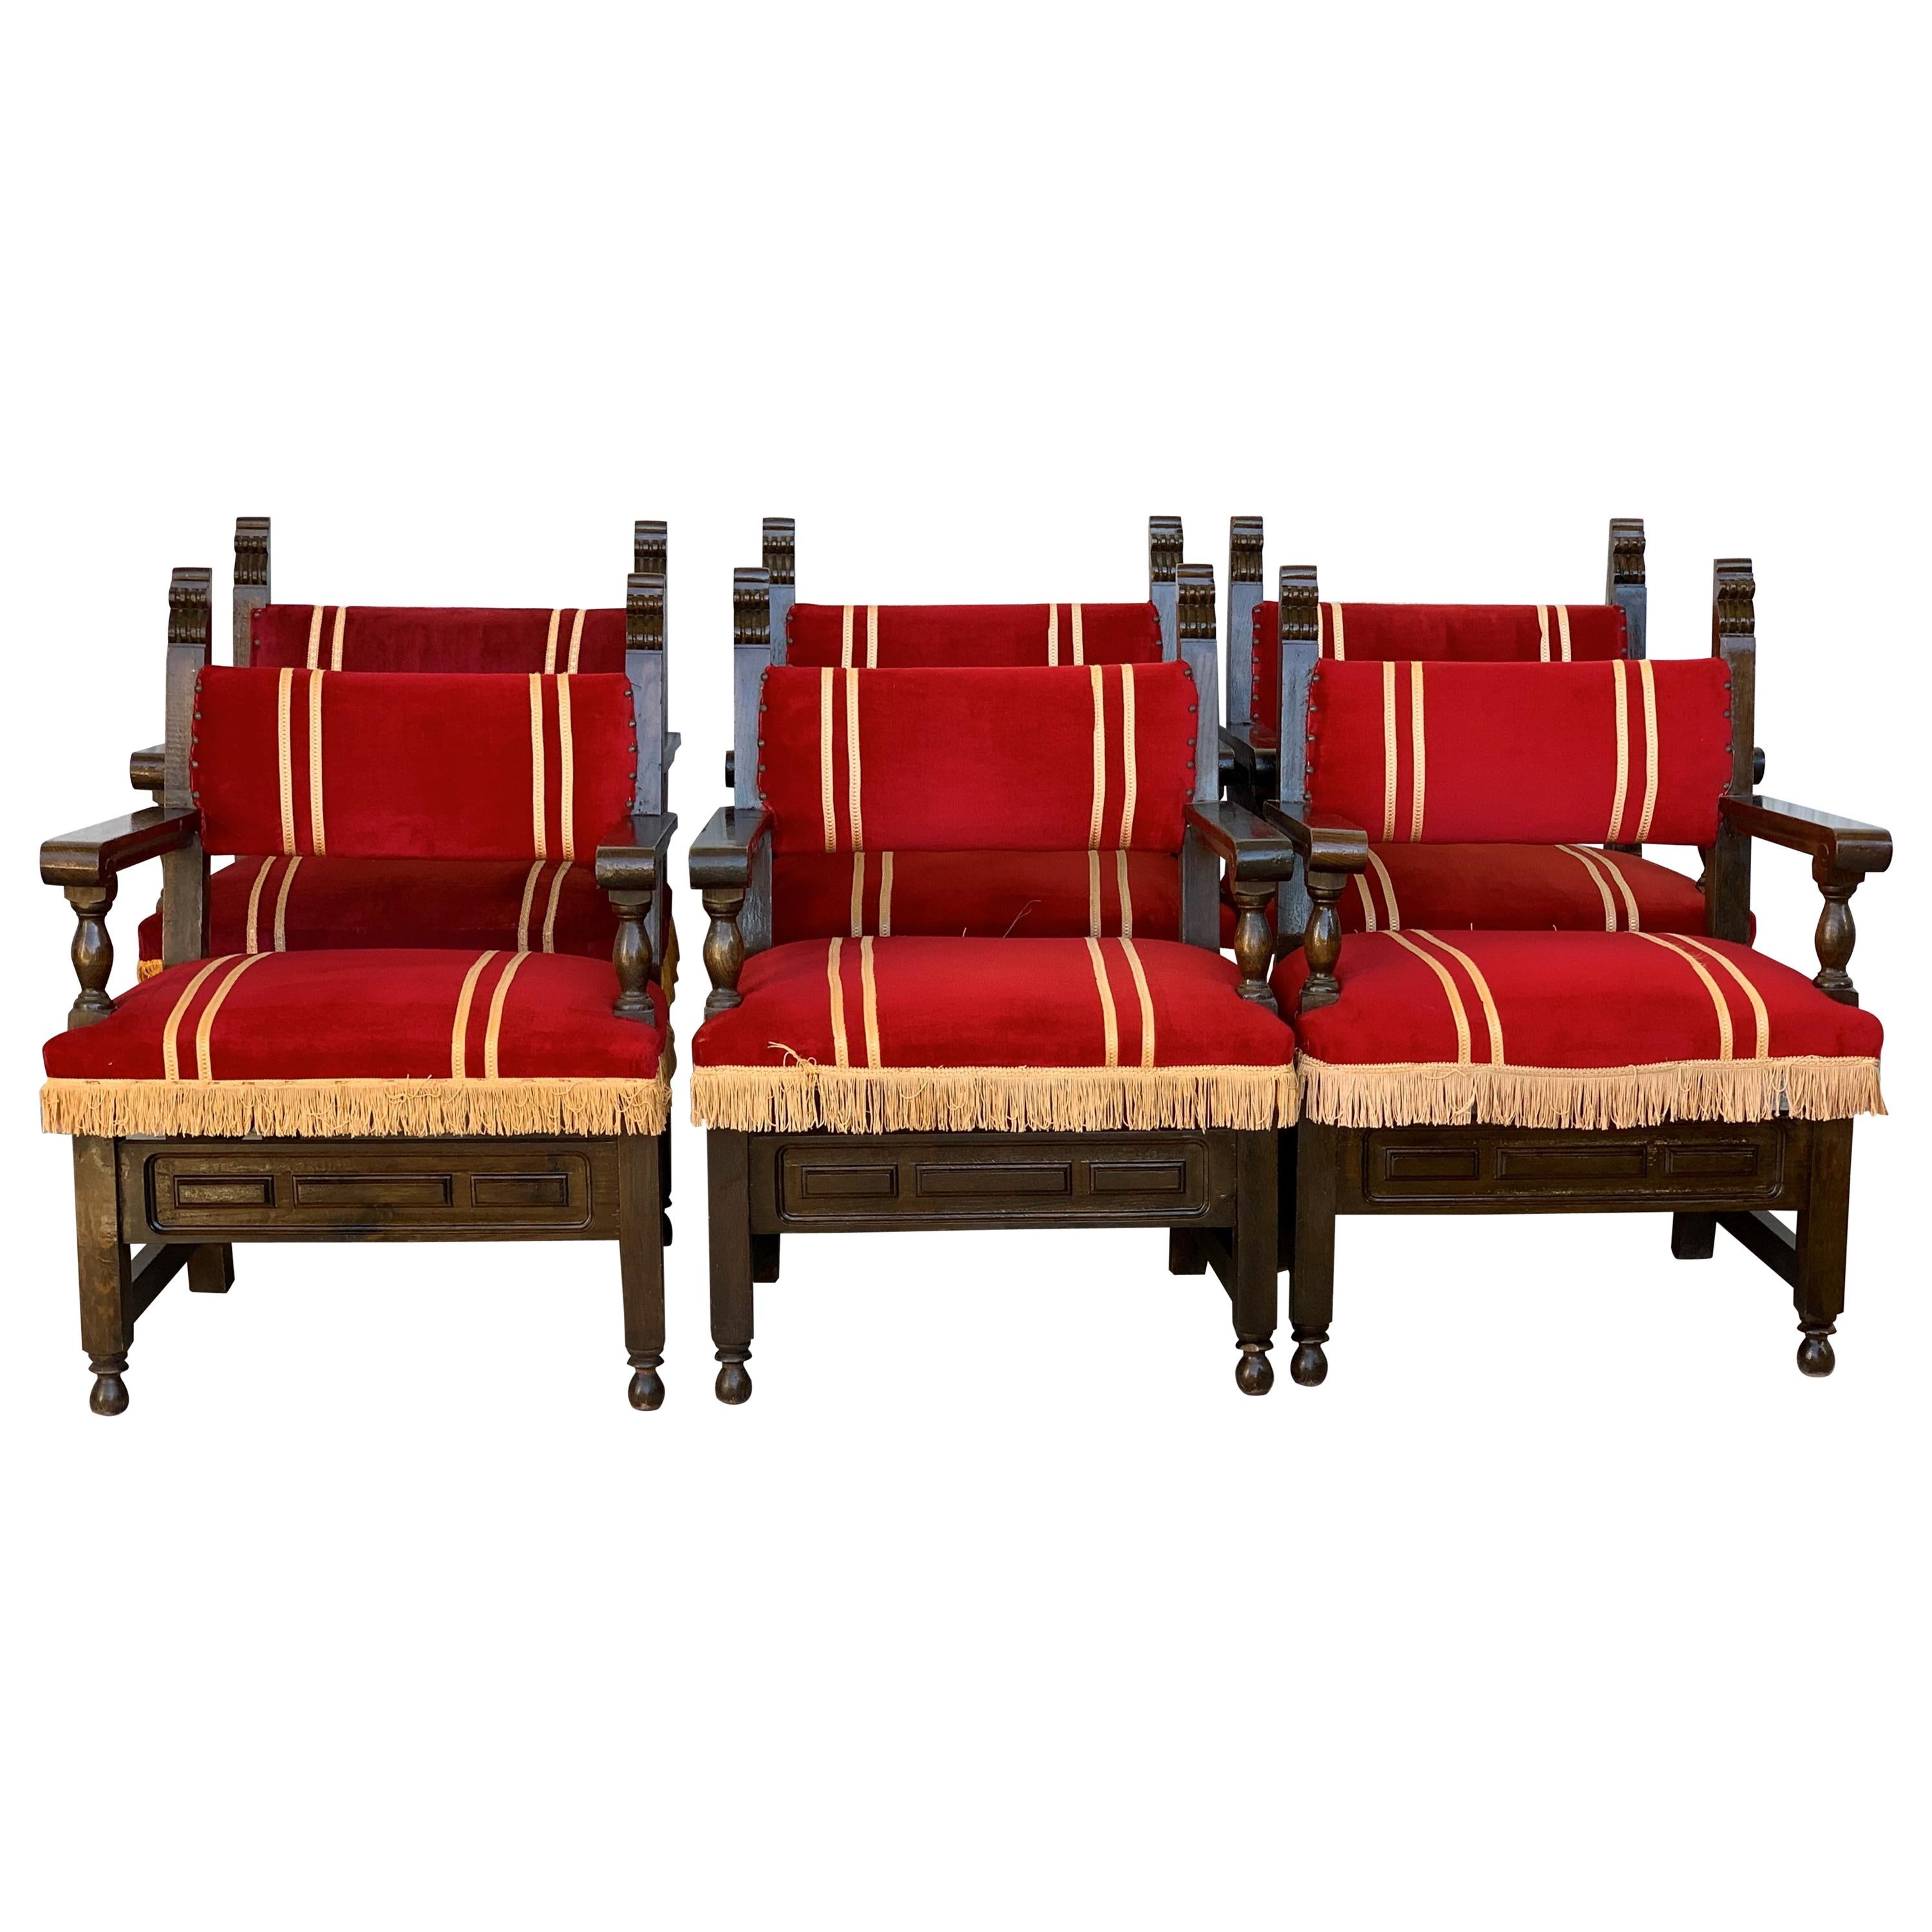 19th century Spanish low armchairs in carved walnut and red velvet upholstery decorated with yellow fringes.
Very very comfortable and resistant’s
It come from an Spanish Casino
46 units available

Ideal for a hotel, bistro bar,